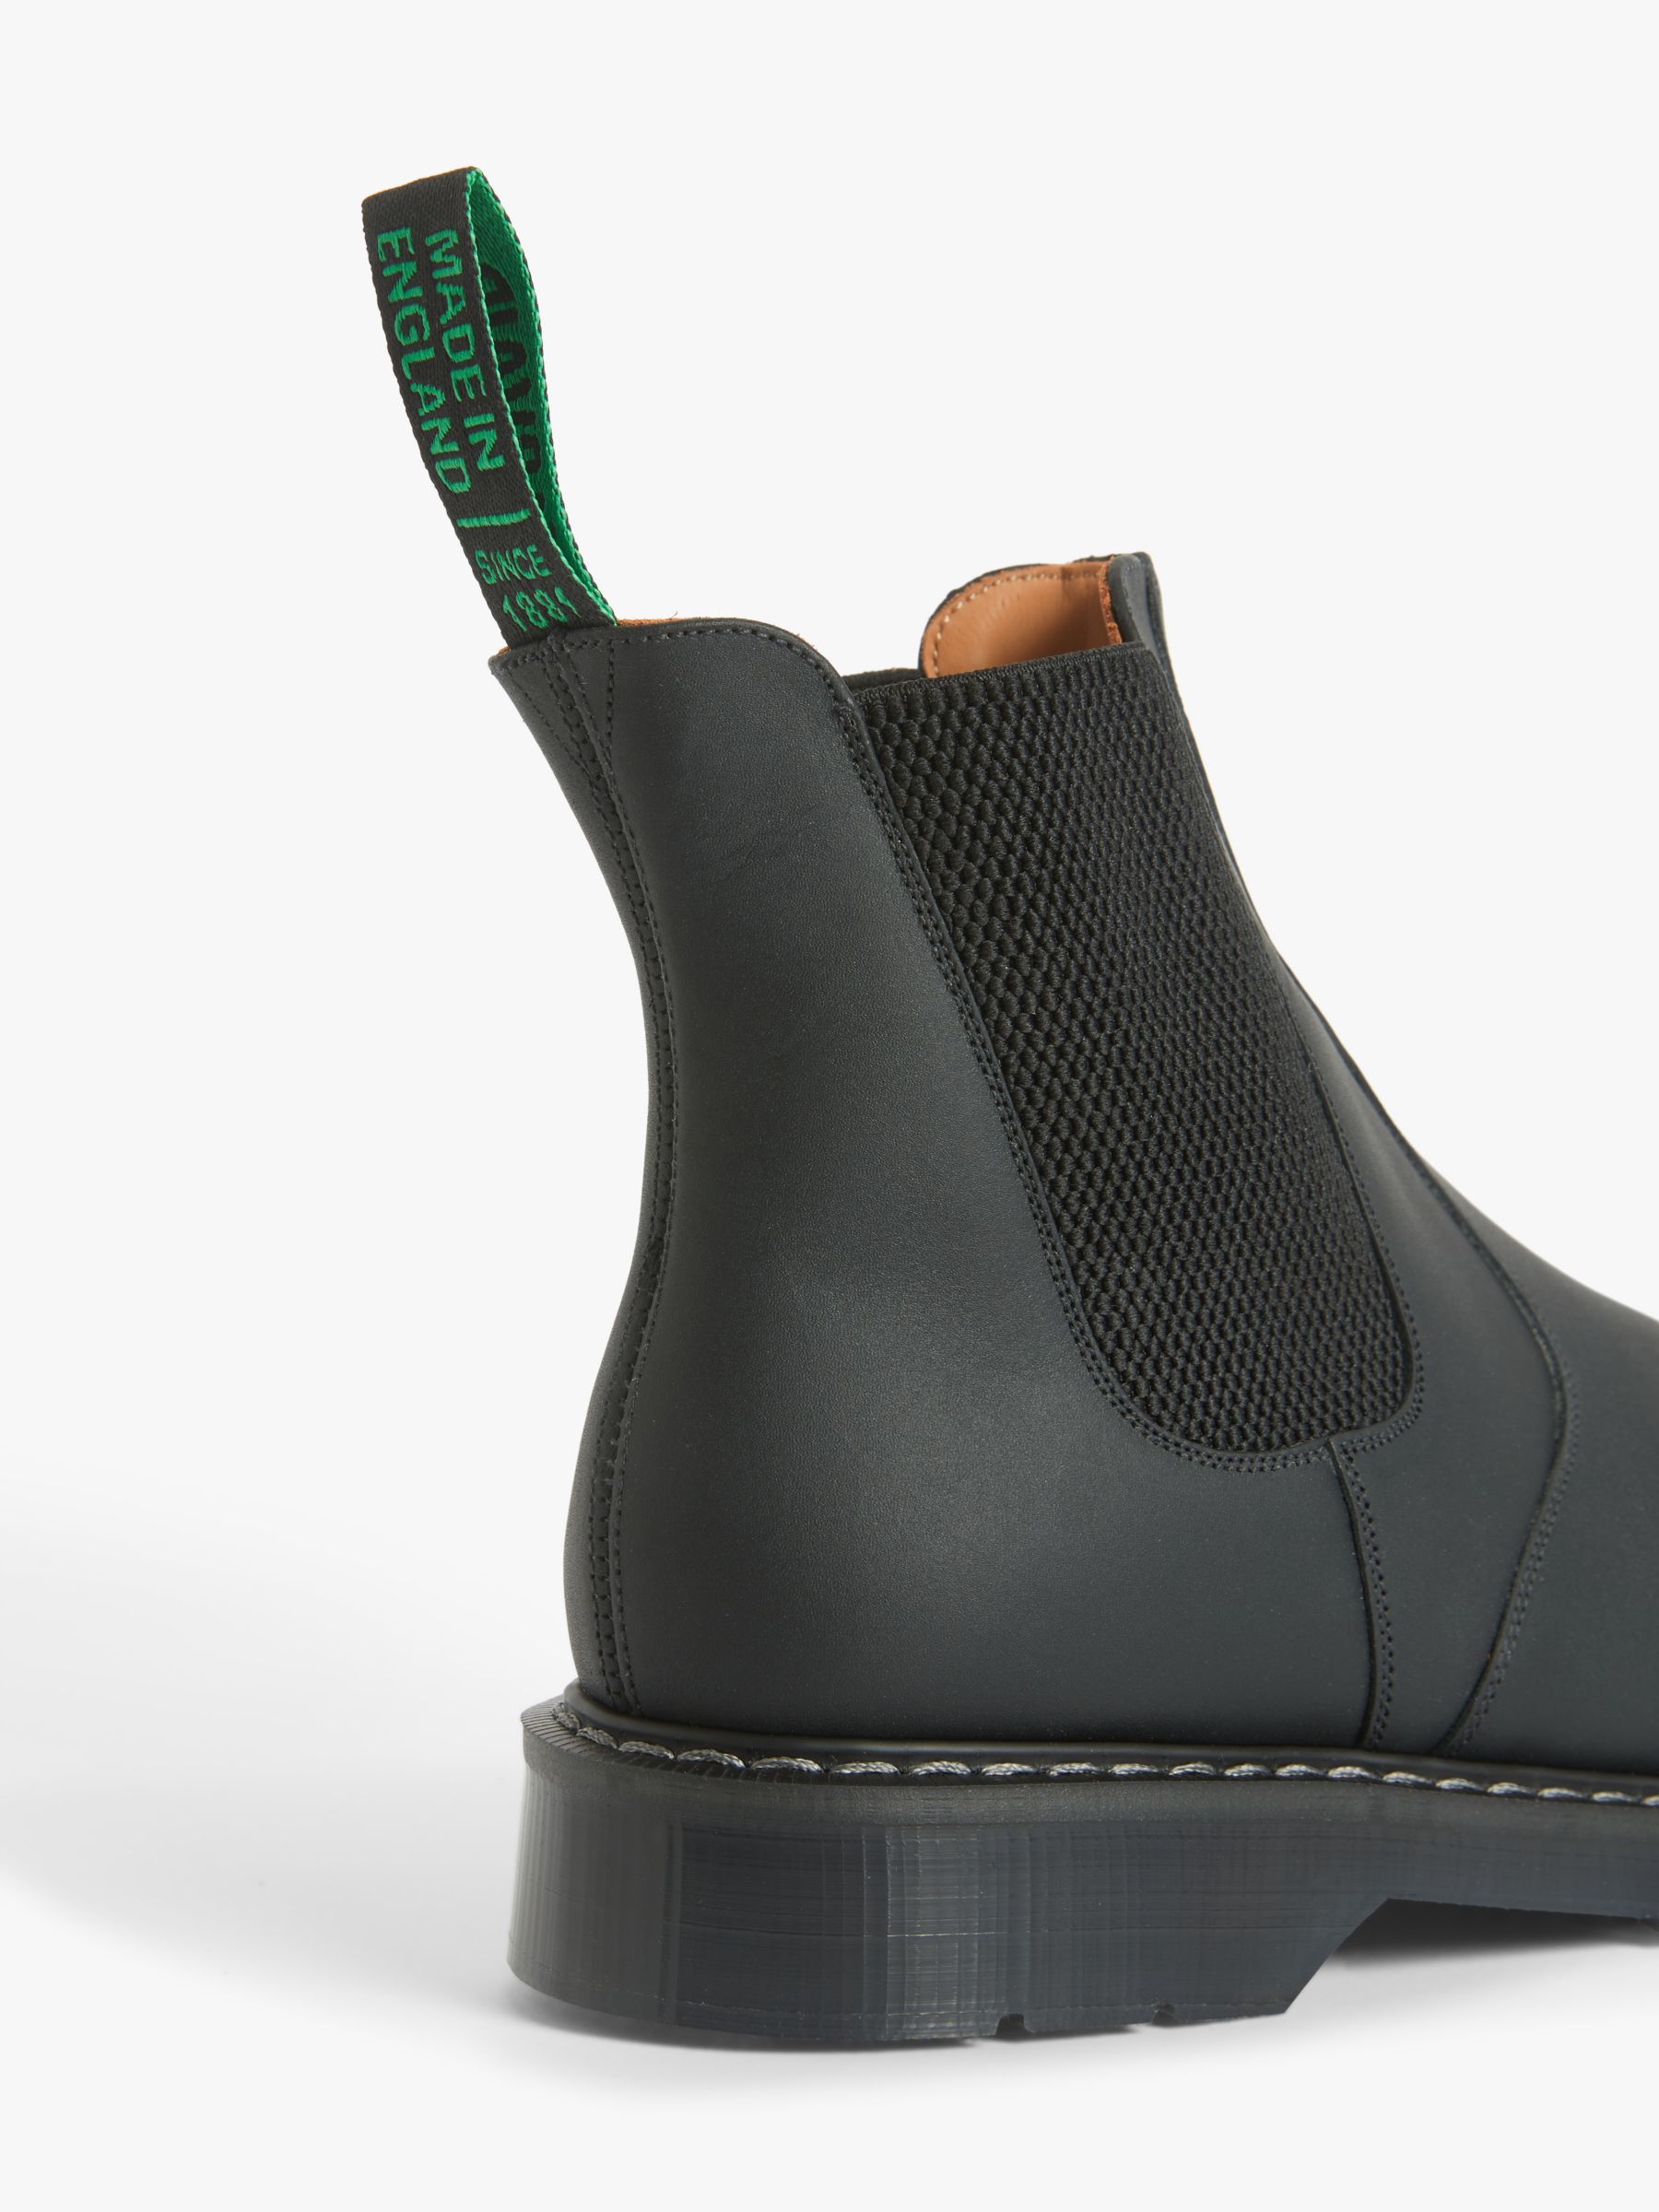 Solovair Made in England Chelsea Boots, Black at John Lewis & Partners